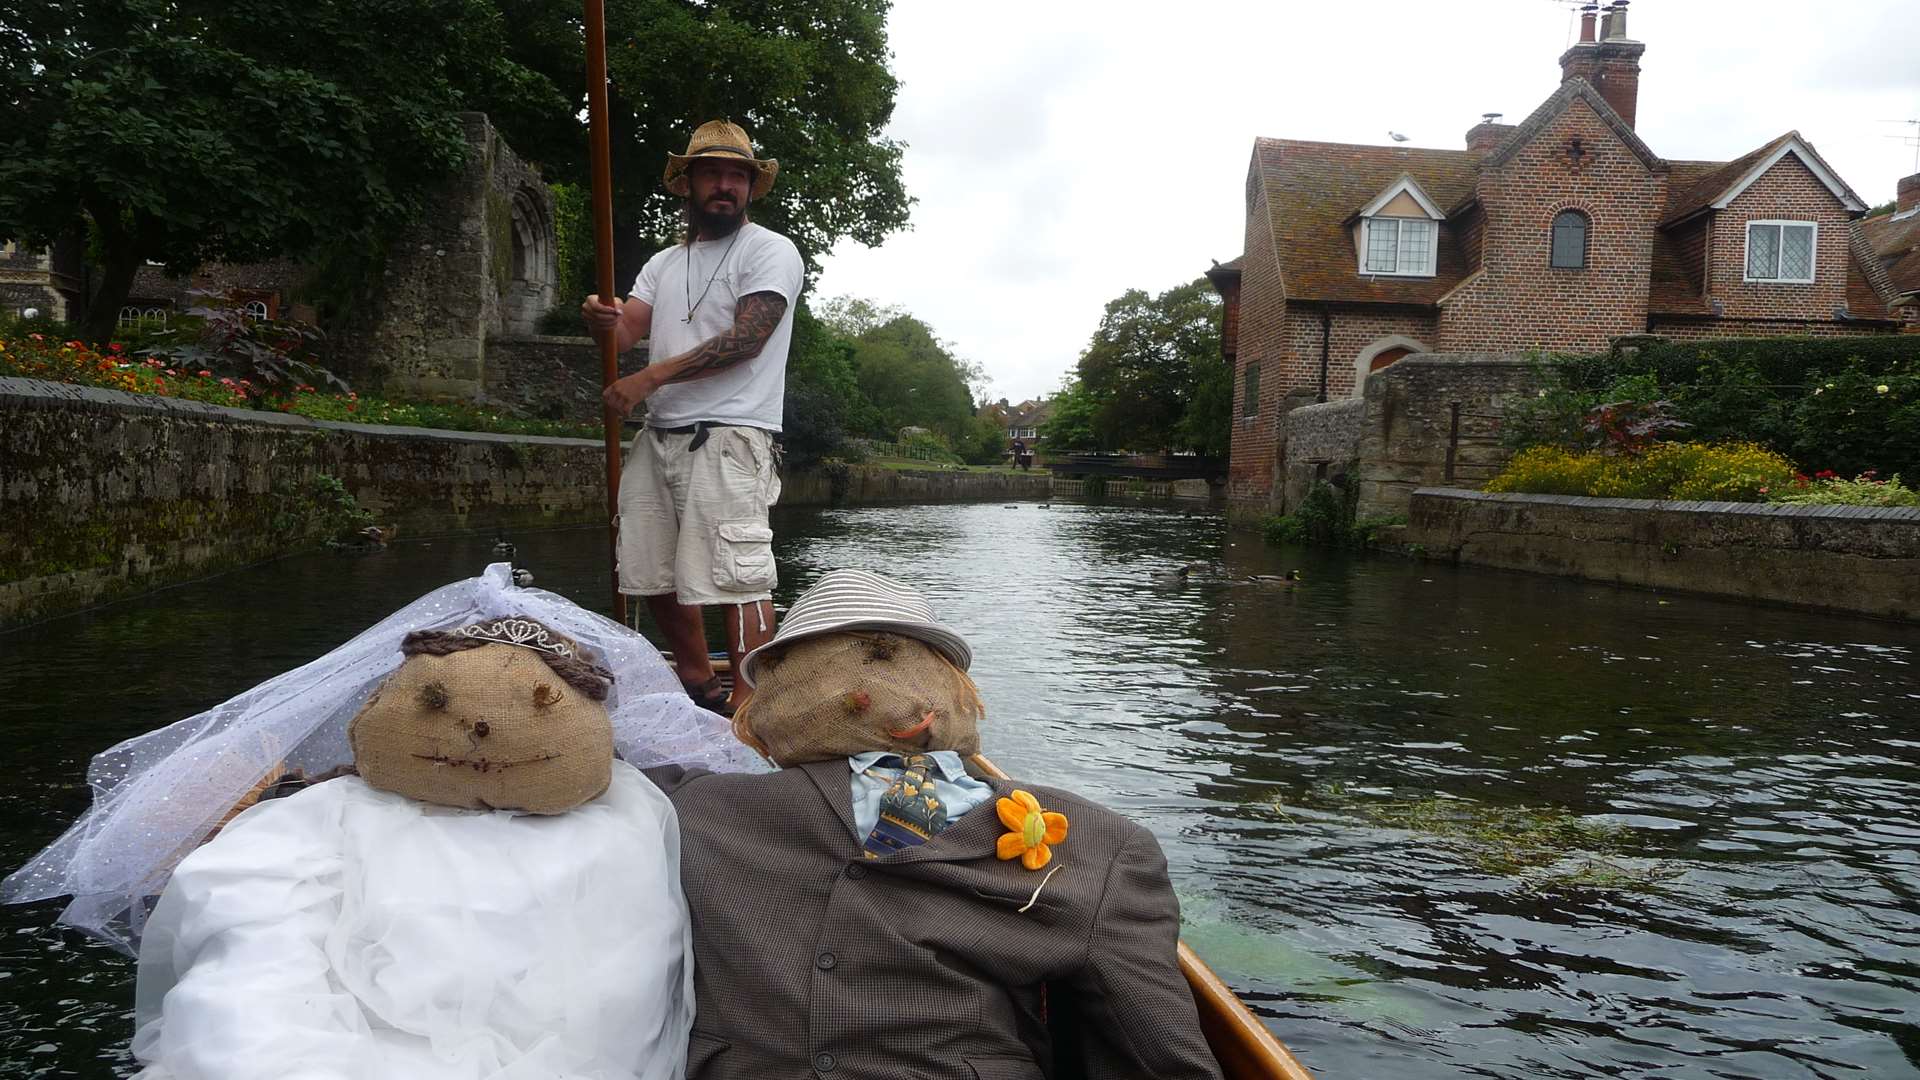 A scarecrow bride and groom-to-be take a trip on the river through Westgate Gardens